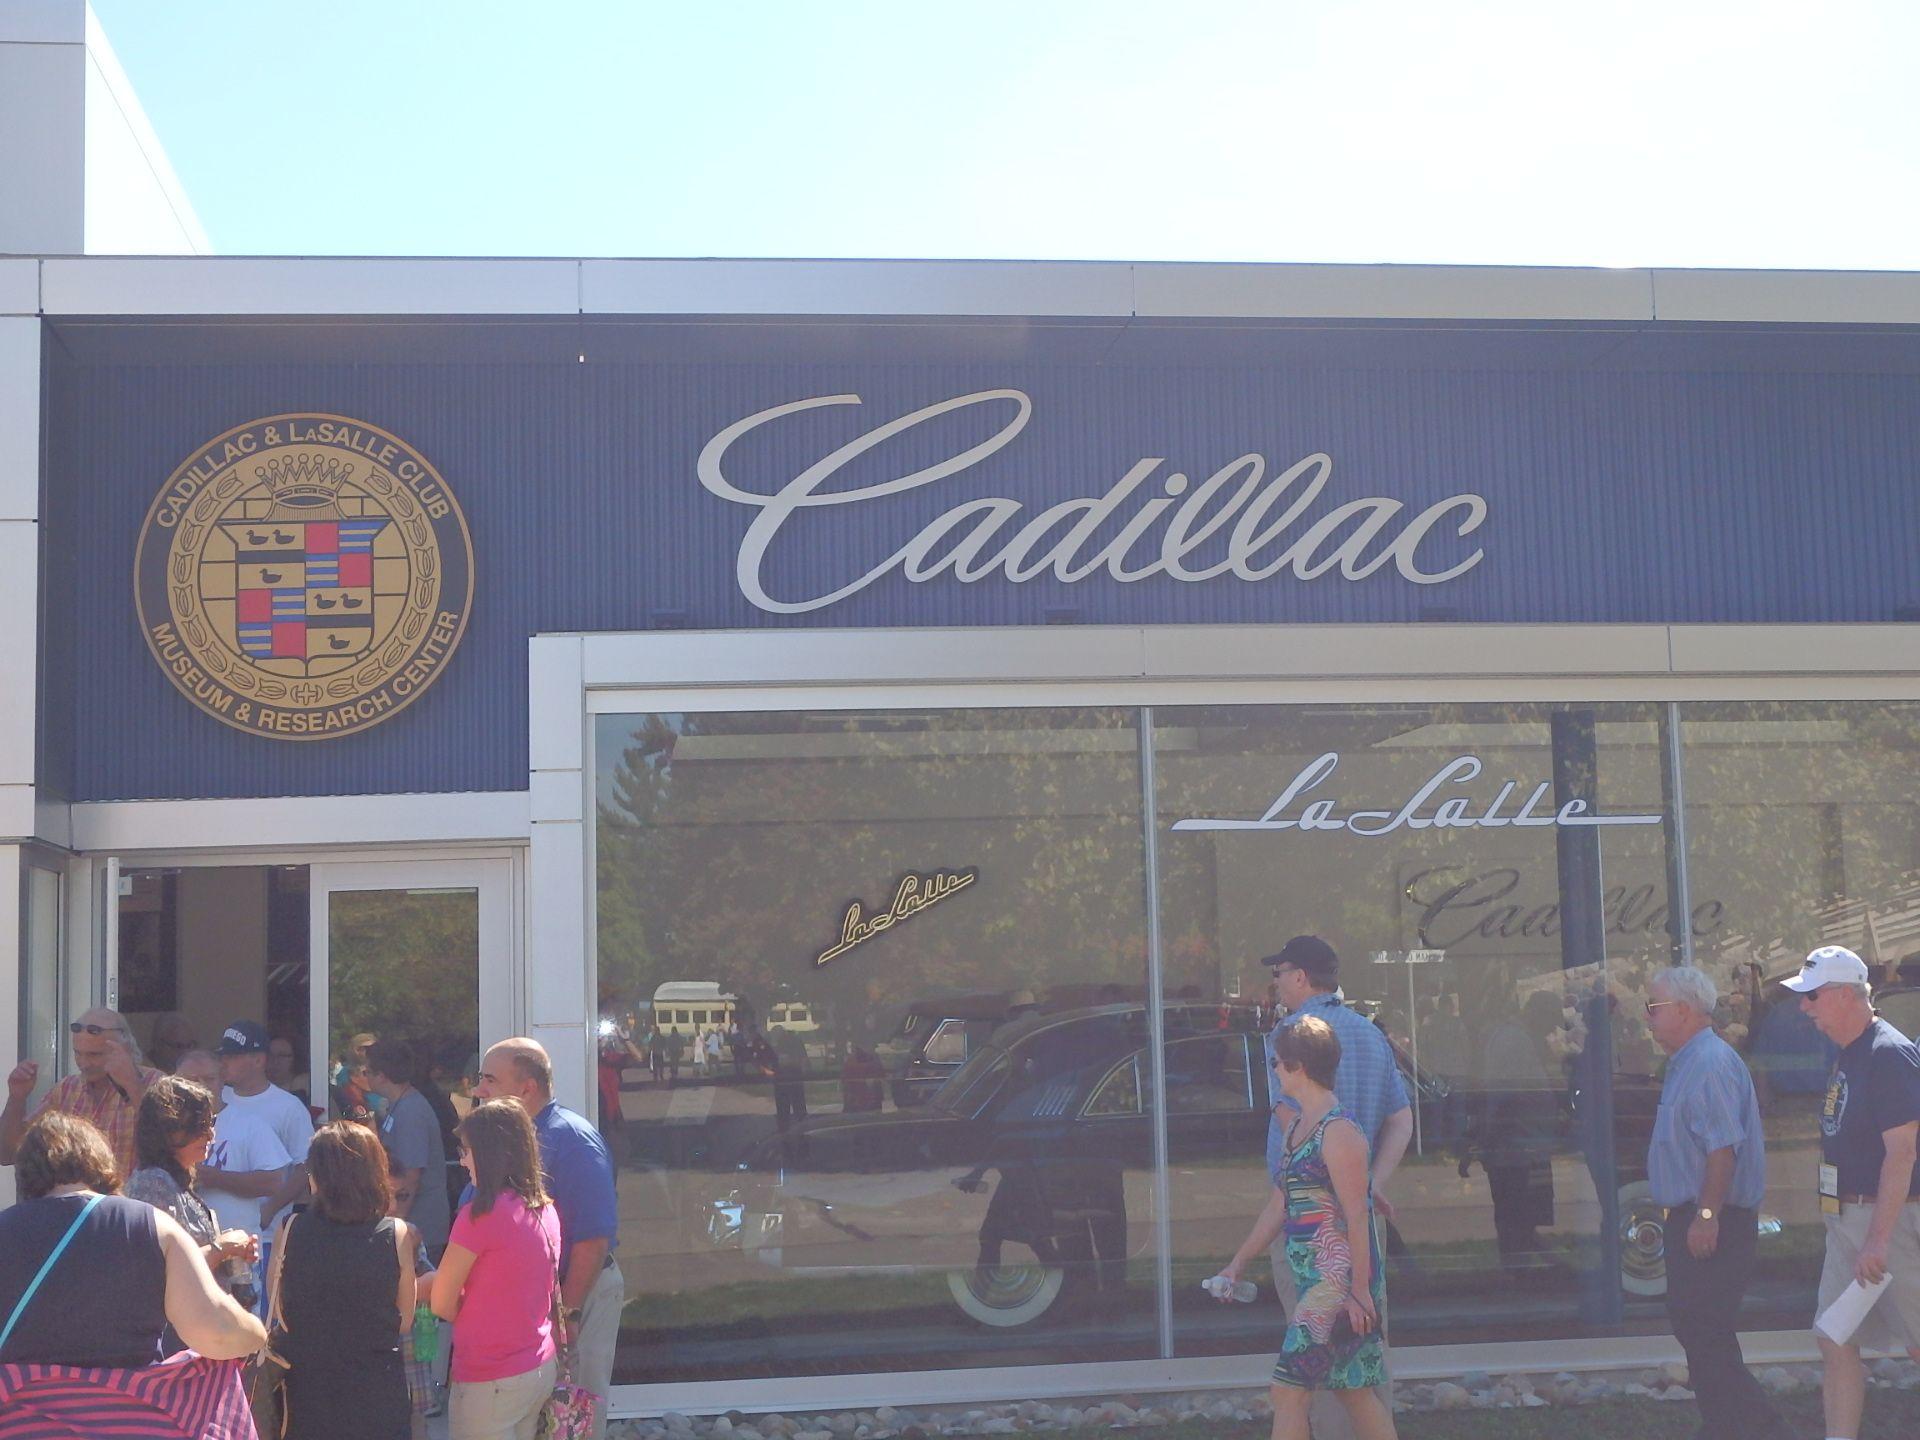 Cadillac LaSalle Club Logo - Cadillac La-Salle Club Museum and Research Center - Home